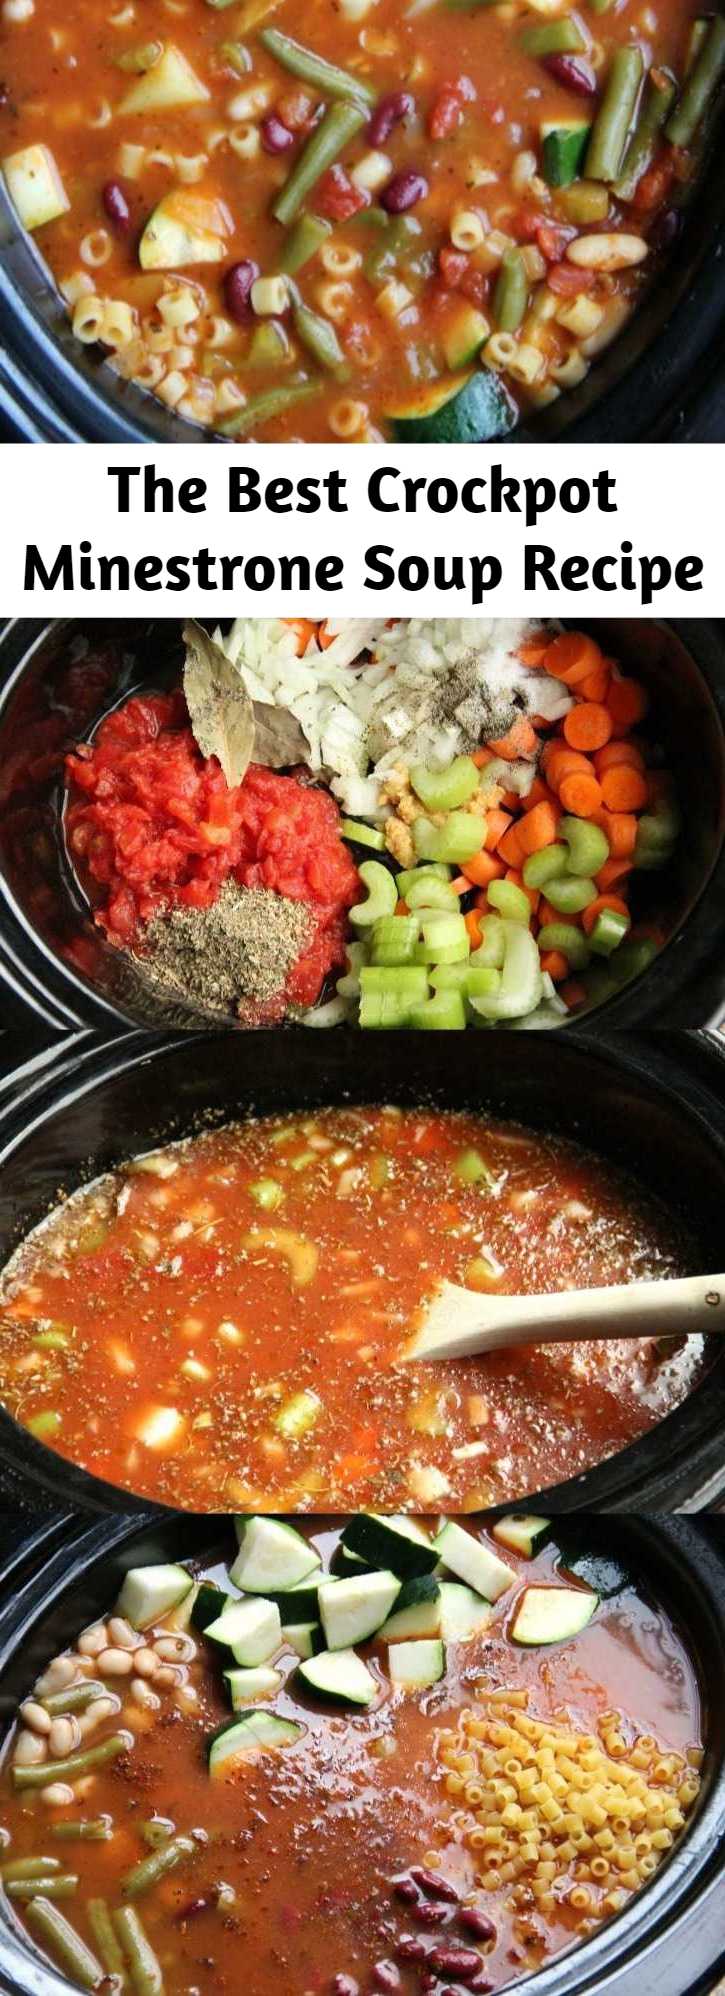 The Best Crockpot Minestrone Soup Recipe - What makes this The Best Crockpot Minestrone Soup? The flavor is spot-on and check out the obscene amount of veggies packed into this bad boy. Amazing!